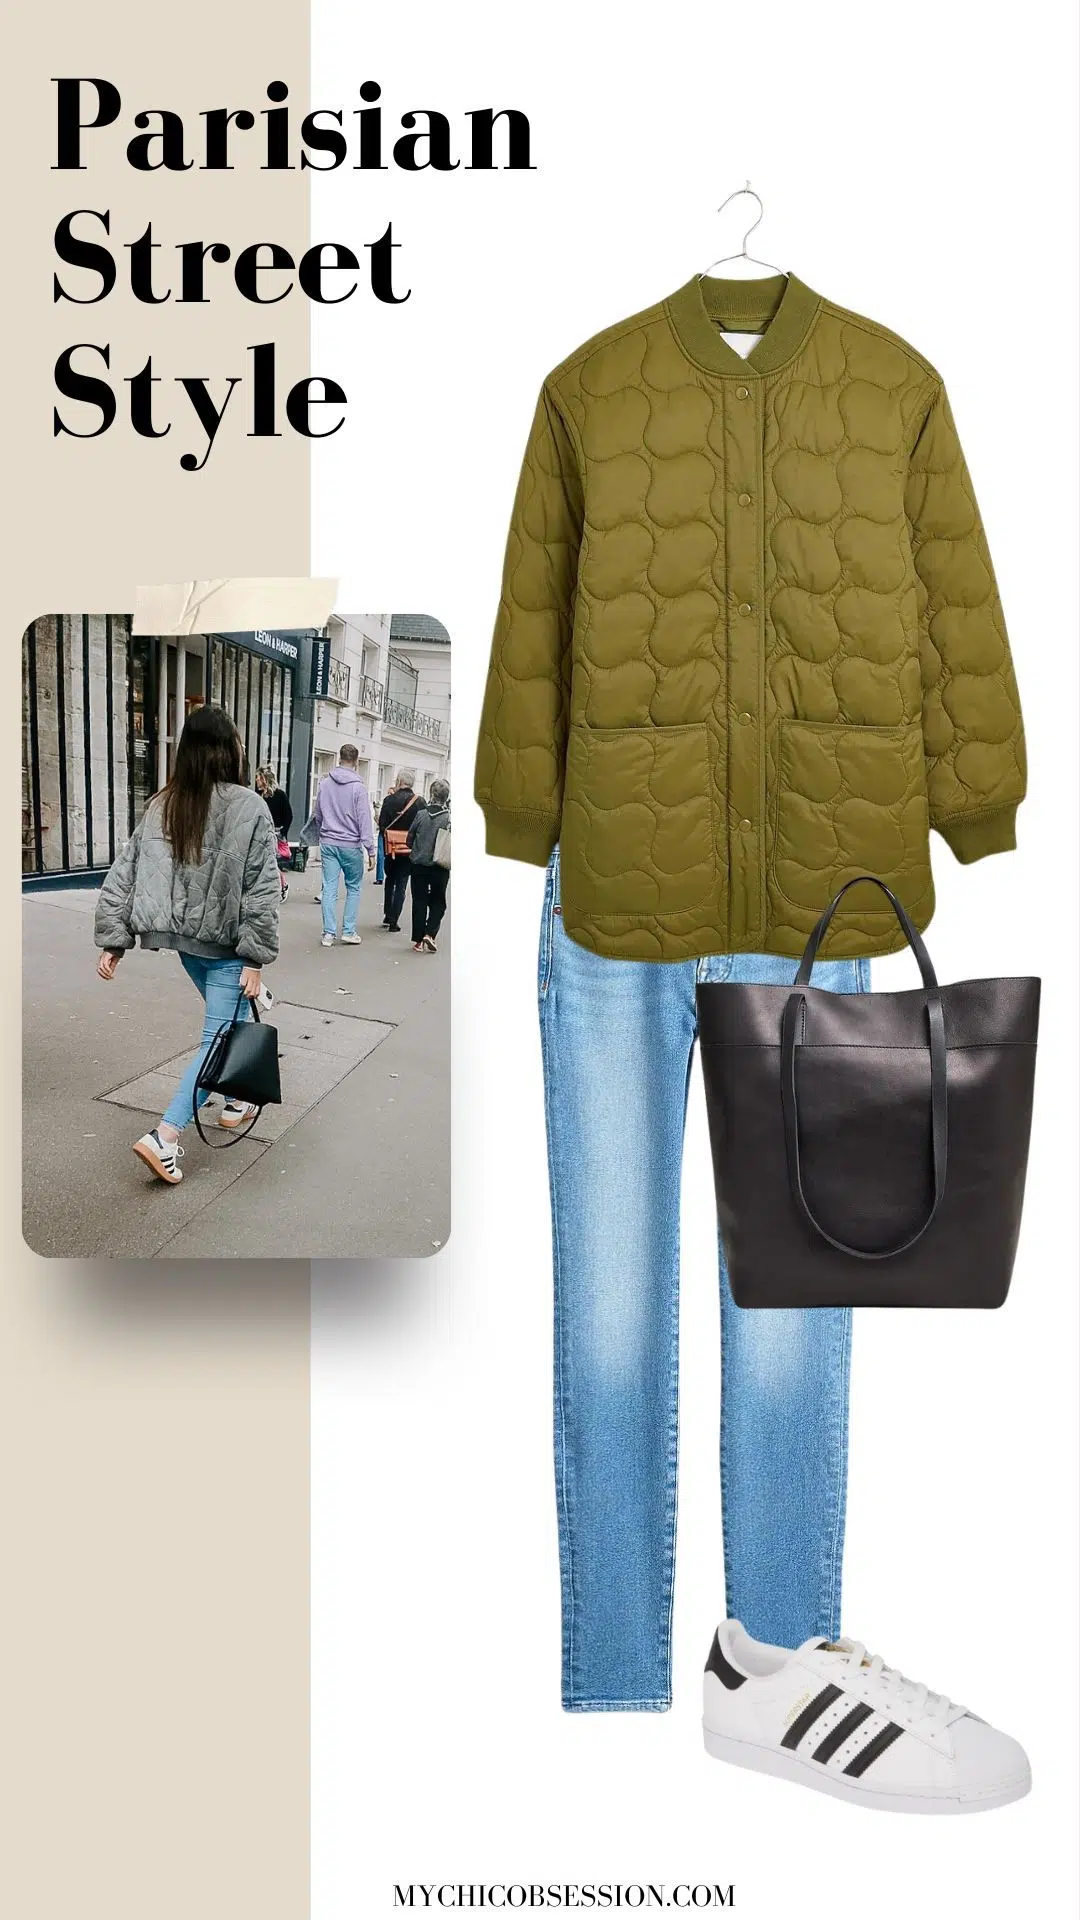 quilted jacket + skinny jeans + adidas sneakers + tote bag